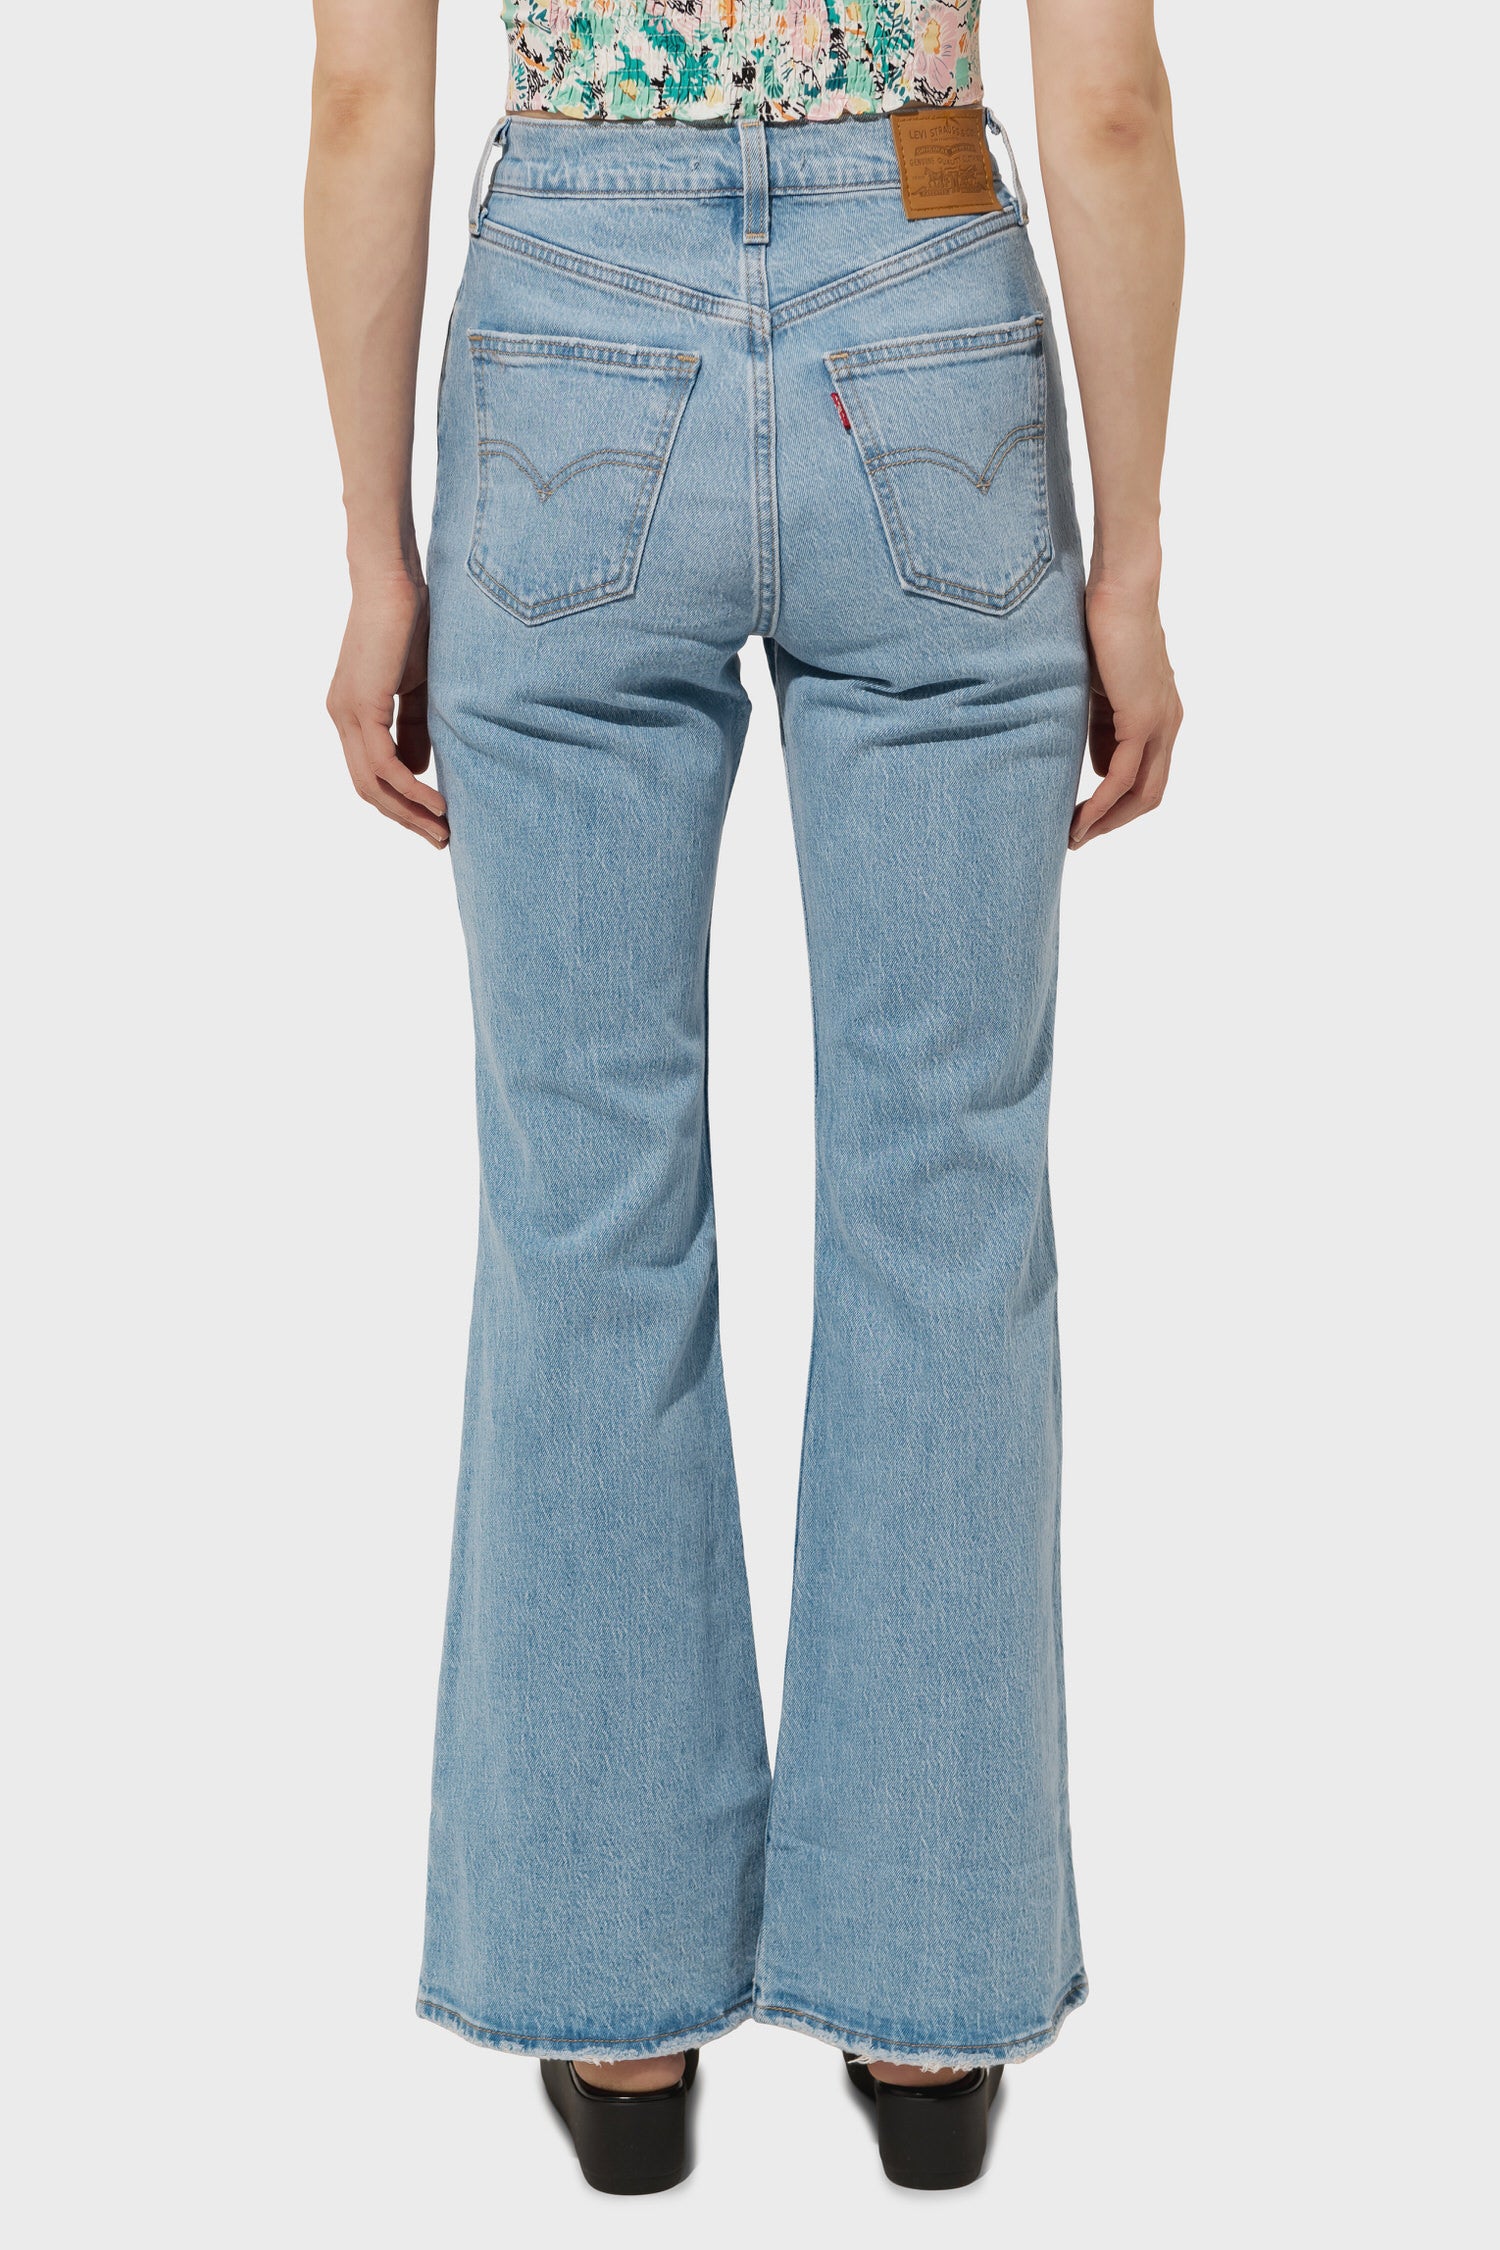 Women's Levi's 70s High Flare in Marin Babe — Philistine